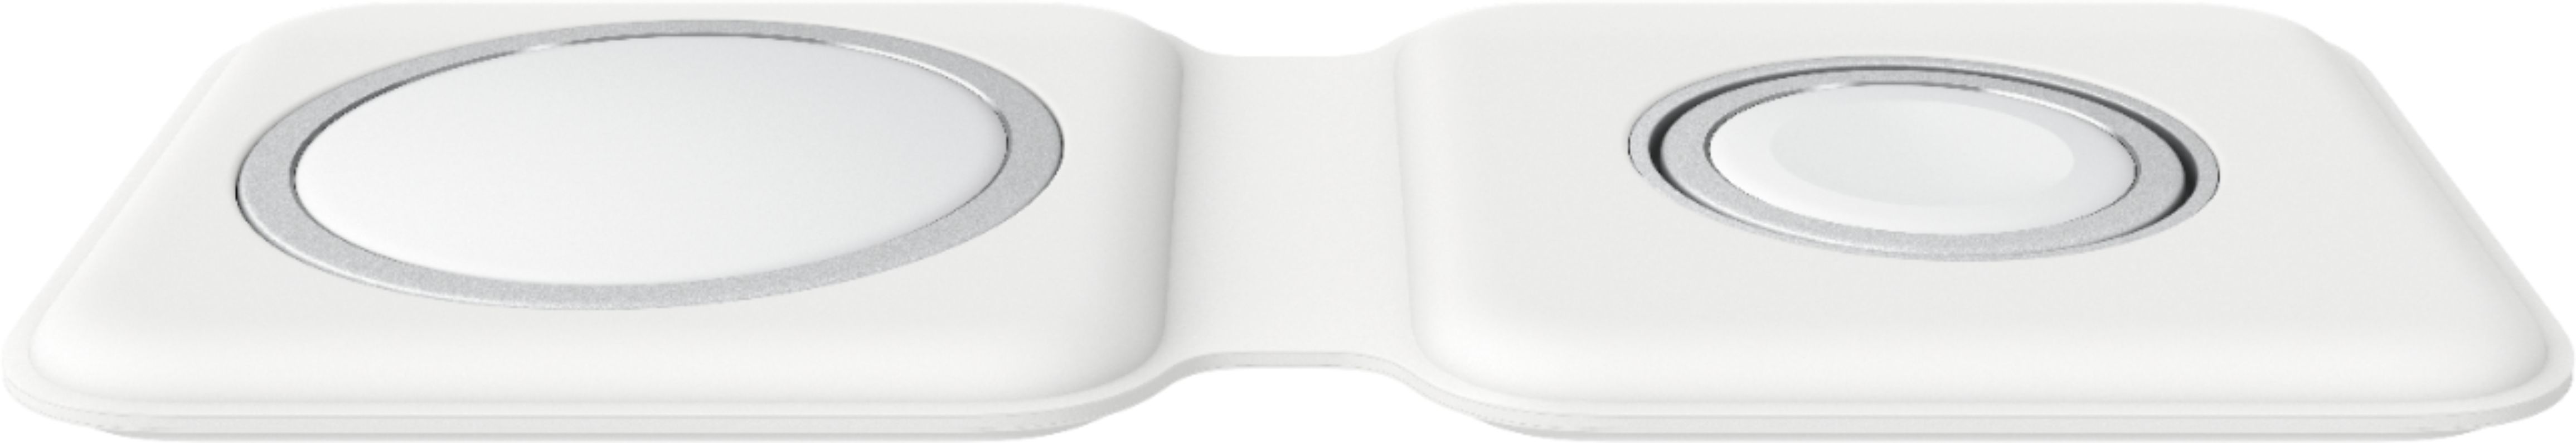 Apple iPhone 12 MagSafe Wireless 15W Qi Charger - White - Vodafone